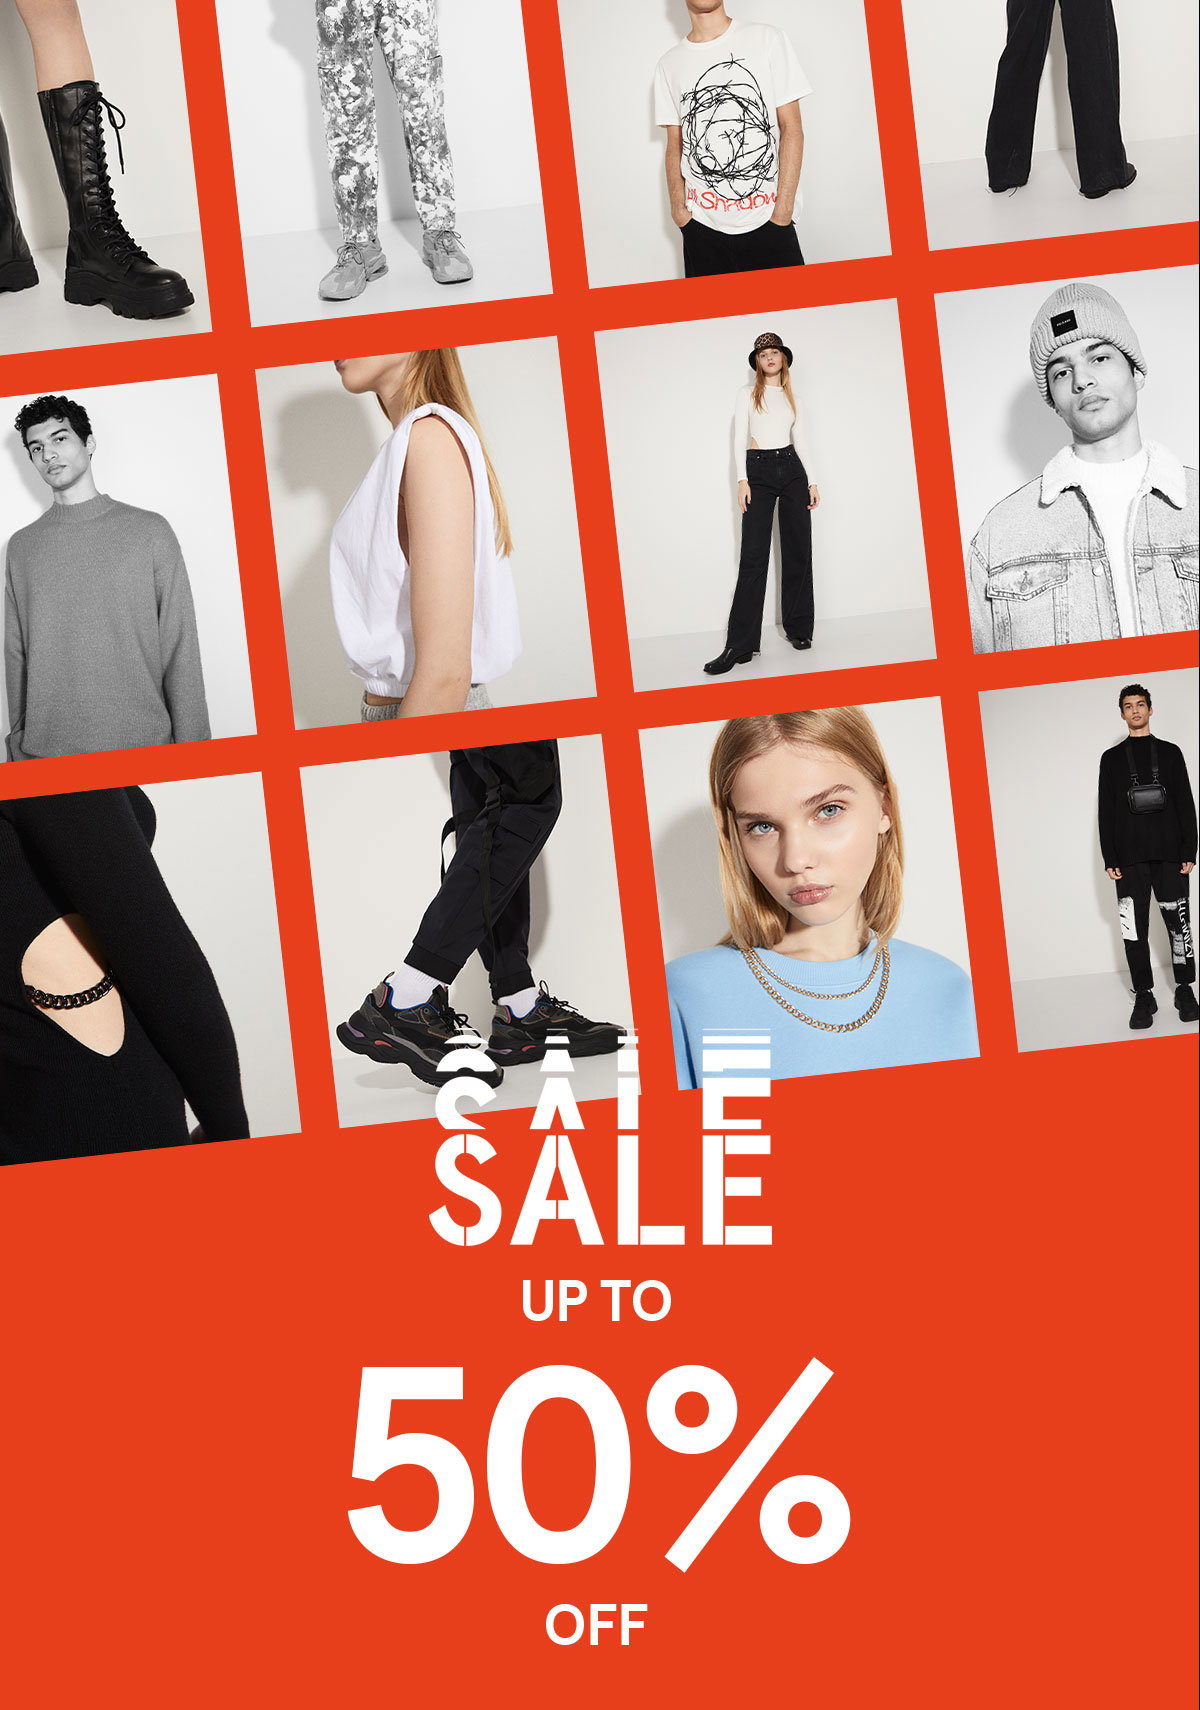 Bershka UK: The SALE starts at 19:00 🤪💥 Discounts of up to 50% off are ...